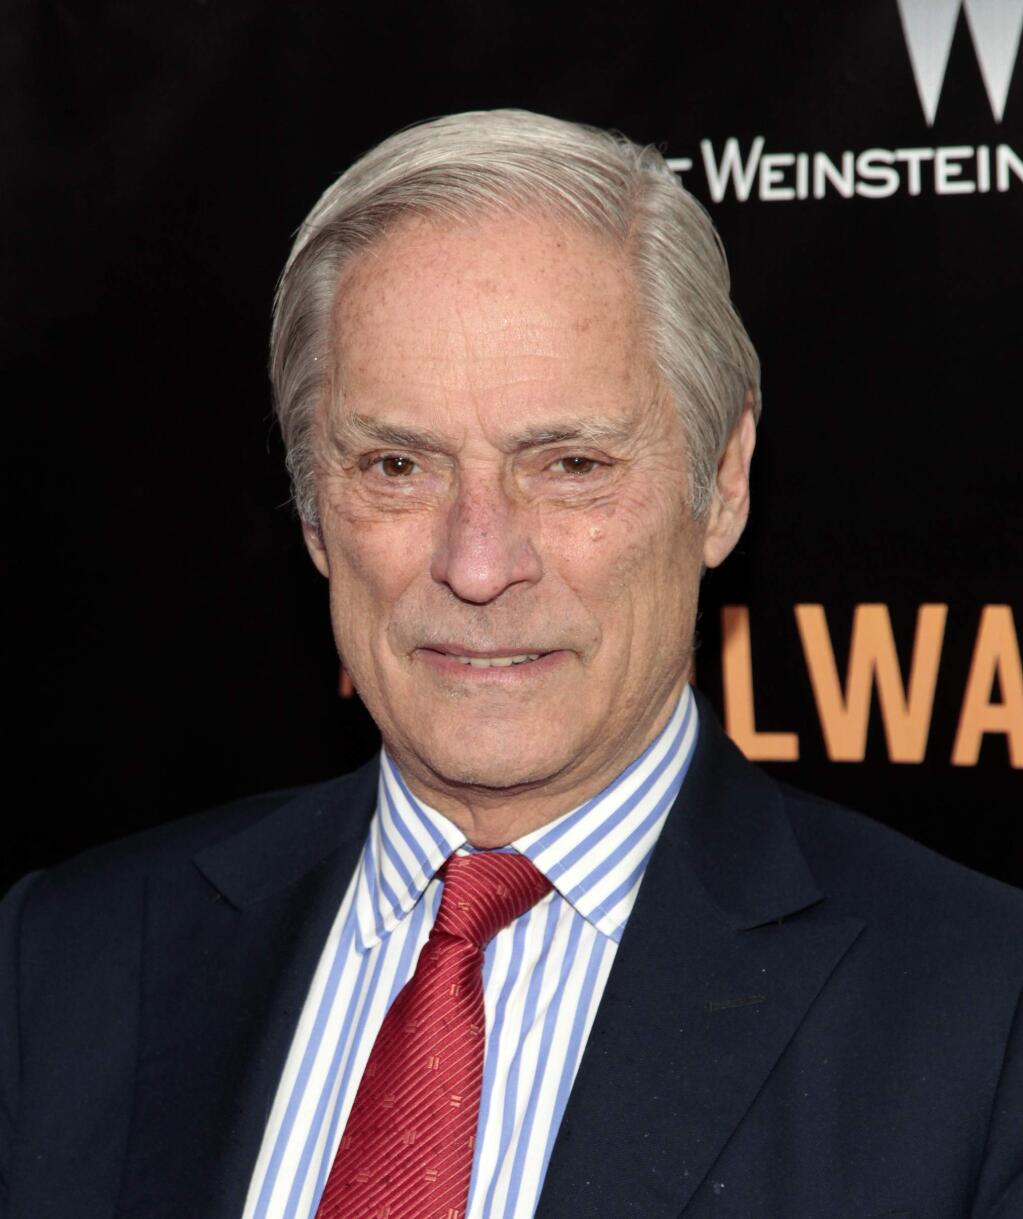 FILE - In this April 7, 2014 file photo, Bob Simon of '60 Minutes,' attends the New York premiere of 'The Railway Man' in New York. CBS says Simon was killed in a car crash on Wednesday, Feb. 11, 2015, in Manhattan. Police say a town car in which he was a passenger hit another car. He was 73. (Photo by Andy Kropa/Invision/AP, File)